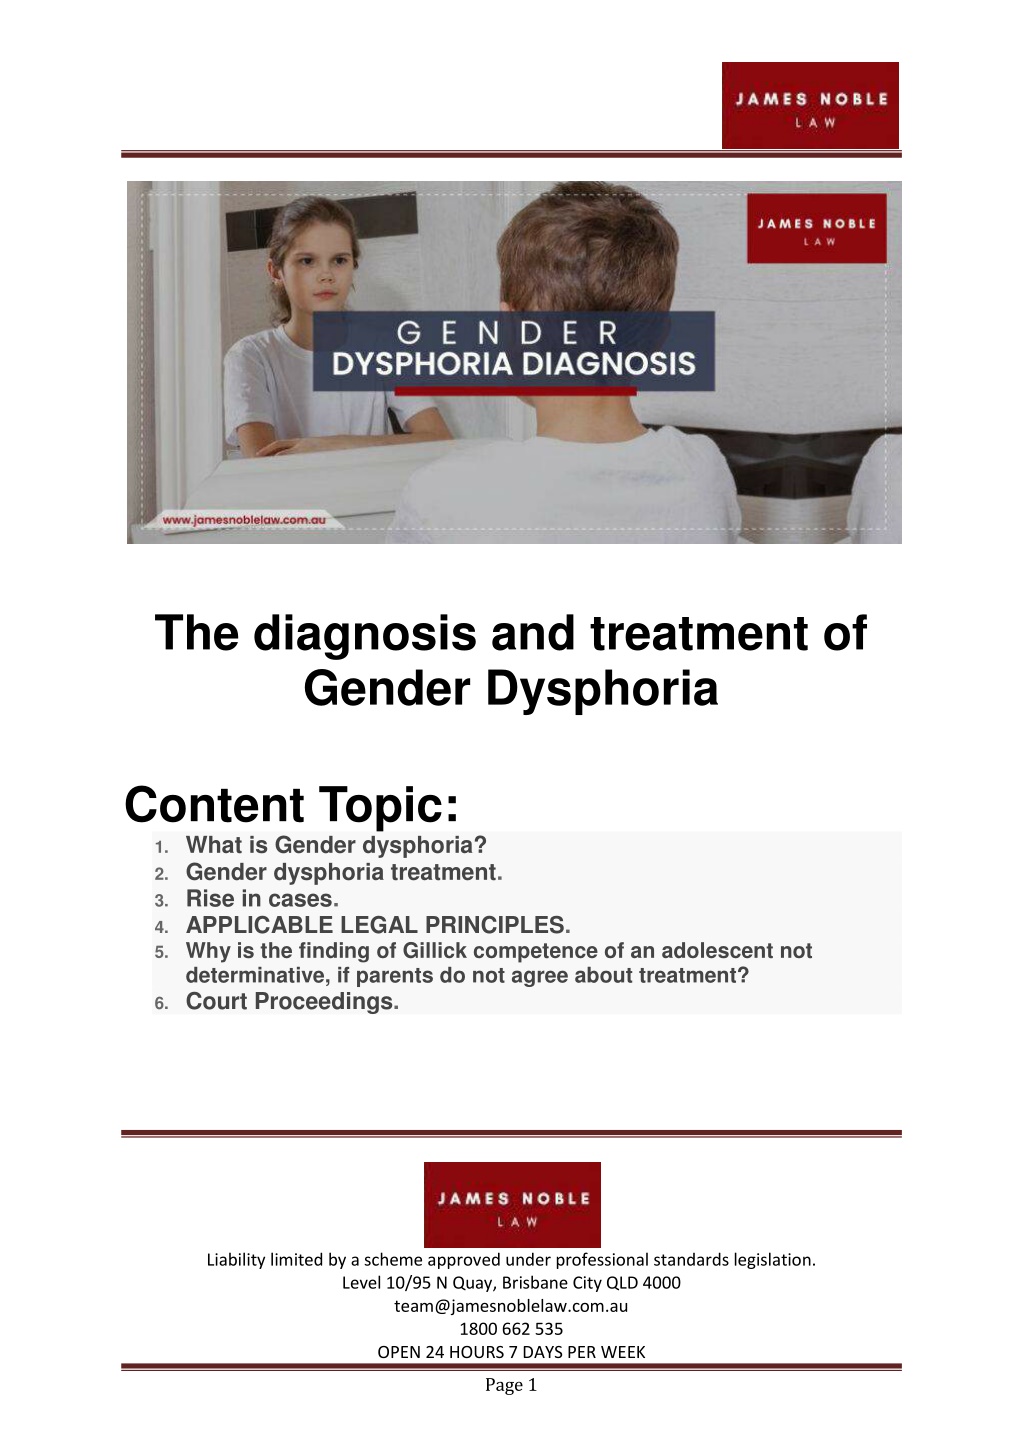 Ppt The Diagnosis And Treatment Of Gender Dysphoria Powerpoint Presentation Id11377791 